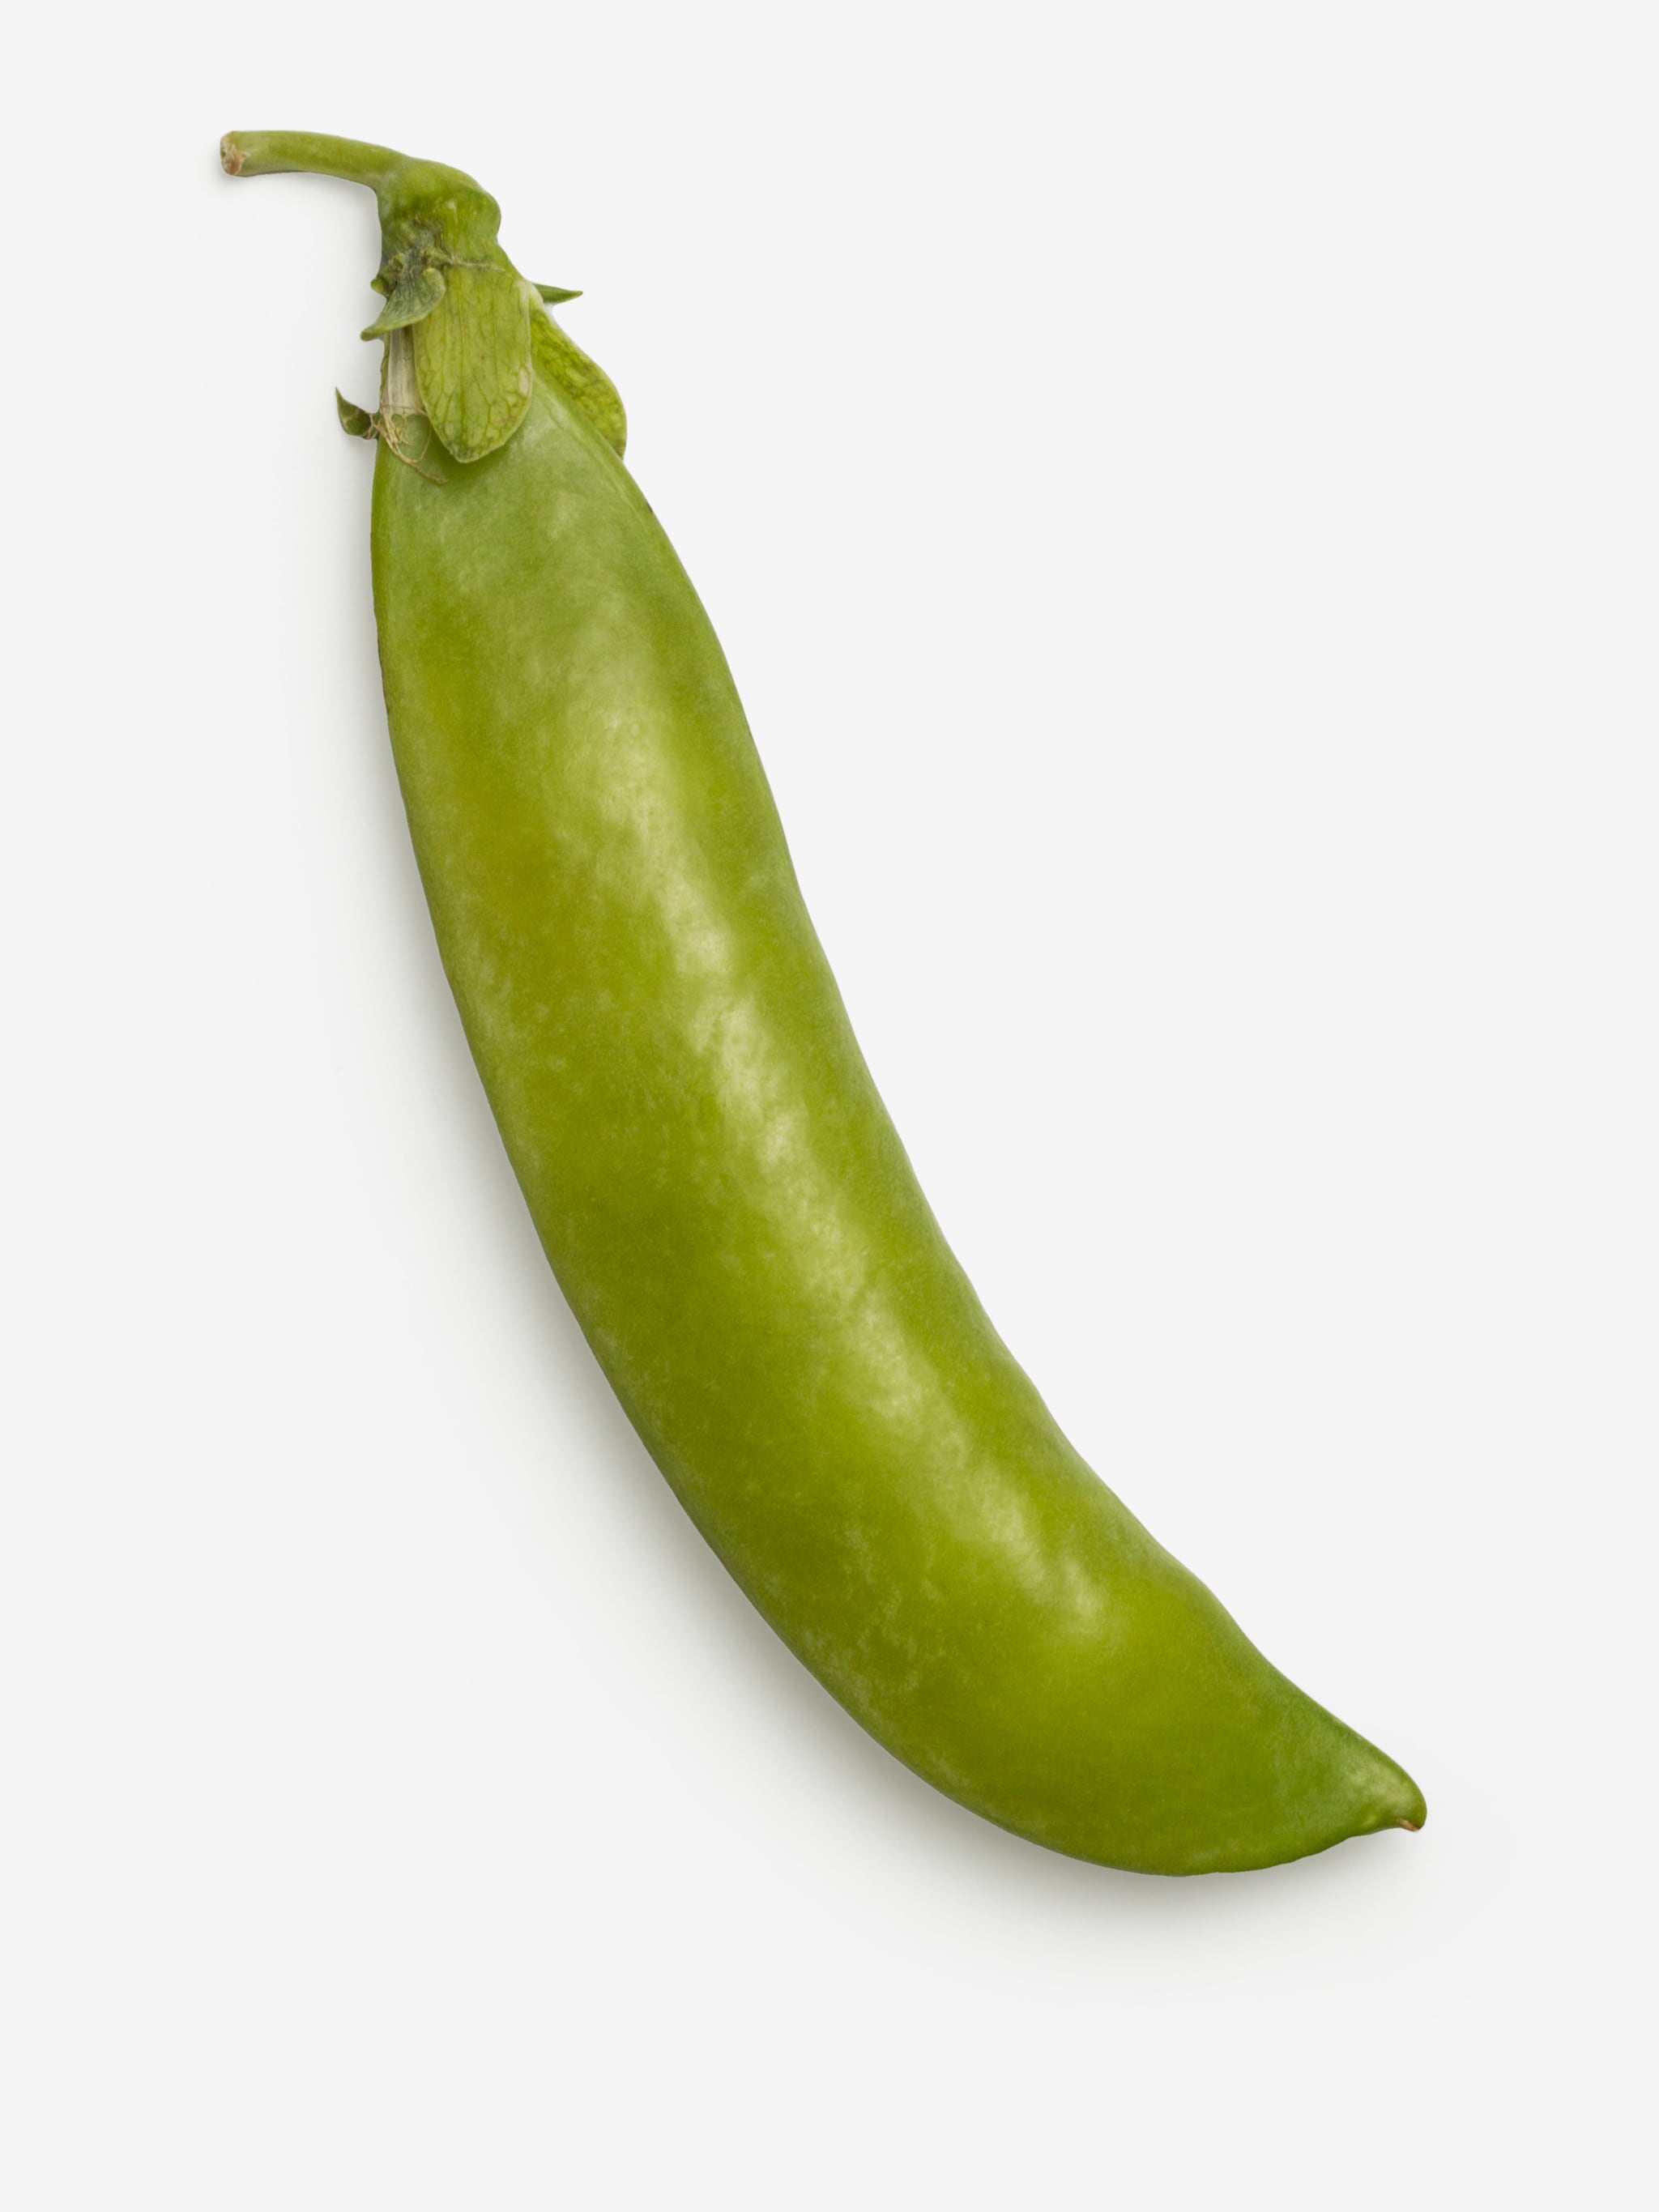 Green Pea image asset with transparent background